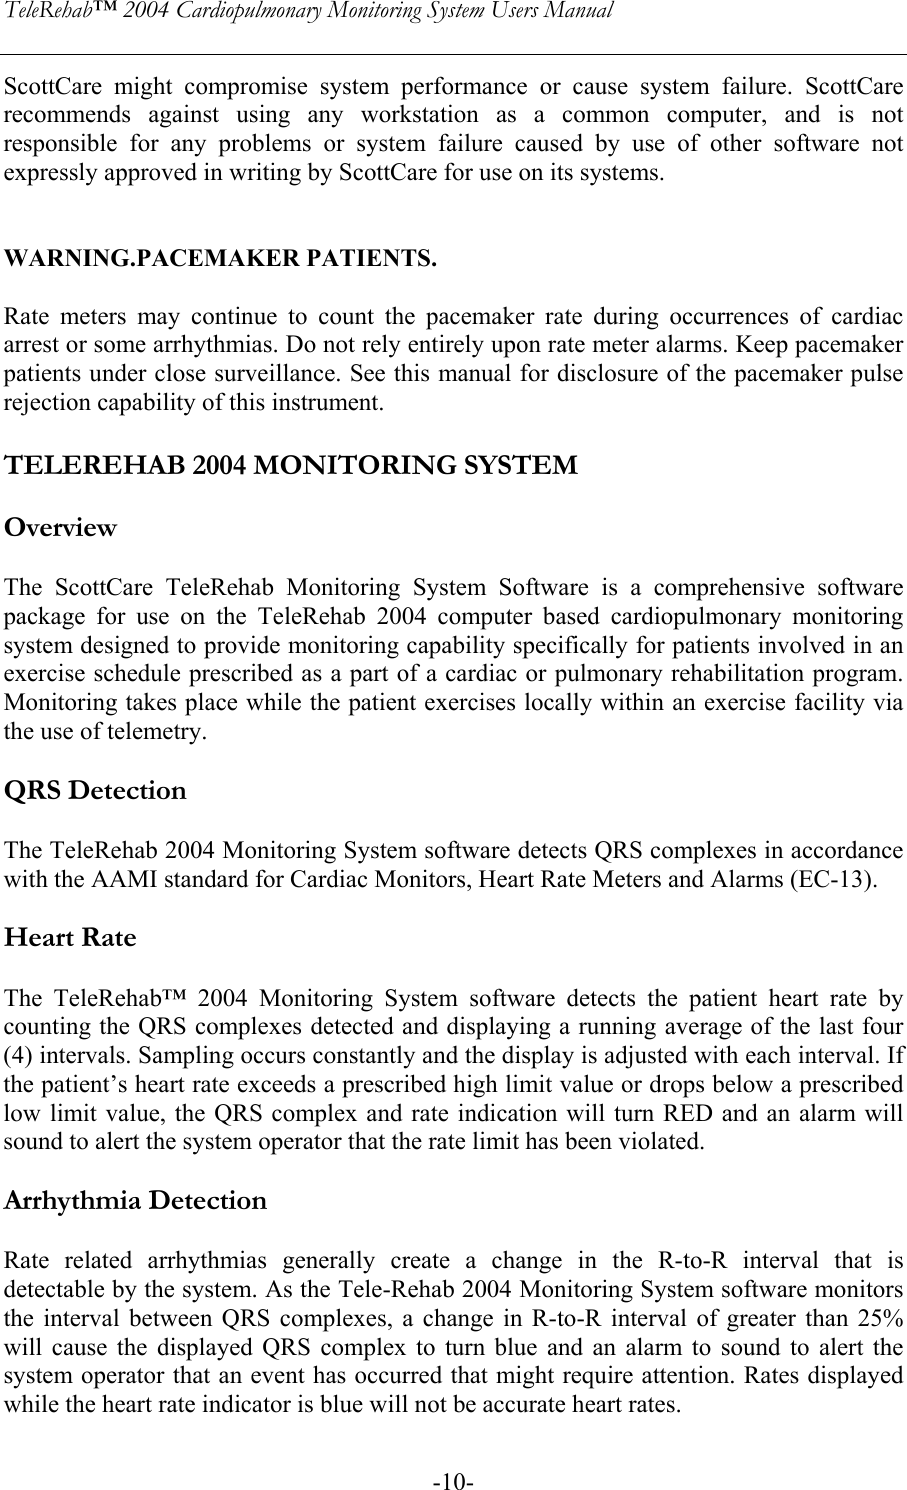 TeleRehab™ 2004 Cardiopulmonary Monitoring System Users Manual    -10-ScottCare might compromise system performance or cause system failure. ScottCare recommends against using any workstation as a common computer, and is not responsible for any problems or system failure caused by use of other software not expressly approved in writing by ScottCare for use on its systems.   WARNING.PACEMAKER PATIENTS.   Rate meters may continue to count the pacemaker rate during occurrences of cardiac arrest or some arrhythmias. Do not rely entirely upon rate meter alarms. Keep pacemaker patients under close surveillance. See this manual for disclosure of the pacemaker pulse rejection capability of this instrument.  TELEREHAB 2004 MONITORING SYSTEM  Overview  The ScottCare TeleRehab Monitoring System Software is a comprehensive software package for use on the TeleRehab 2004 computer based cardiopulmonary monitoring system designed to provide monitoring capability specifically for patients involved in an exercise schedule prescribed as a part of a cardiac or pulmonary rehabilitation program. Monitoring takes place while the patient exercises locally within an exercise facility via the use of telemetry.  QRS Detection  The TeleRehab 2004 Monitoring System software detects QRS complexes in accordance with the AAMI standard for Cardiac Monitors, Heart Rate Meters and Alarms (EC-13).  Heart Rate  The TeleRehab™ 2004 Monitoring System software detects the patient heart rate by counting the QRS complexes detected and displaying a running average of the last four (4) intervals. Sampling occurs constantly and the display is adjusted with each interval. If the patient’s heart rate exceeds a prescribed high limit value or drops below a prescribed low limit value, the QRS complex and rate indication will turn RED and an alarm will sound to alert the system operator that the rate limit has been violated.  Arrhythmia Detection  Rate related arrhythmias generally create a change in the R-to-R interval that is detectable by the system. As the Tele-Rehab 2004 Monitoring System software monitors the interval between QRS complexes, a change in R-to-R interval of greater than 25% will cause the displayed QRS complex to turn blue and an alarm to sound to alert the system operator that an event has occurred that might require attention. Rates displayed while the heart rate indicator is blue will not be accurate heart rates. 